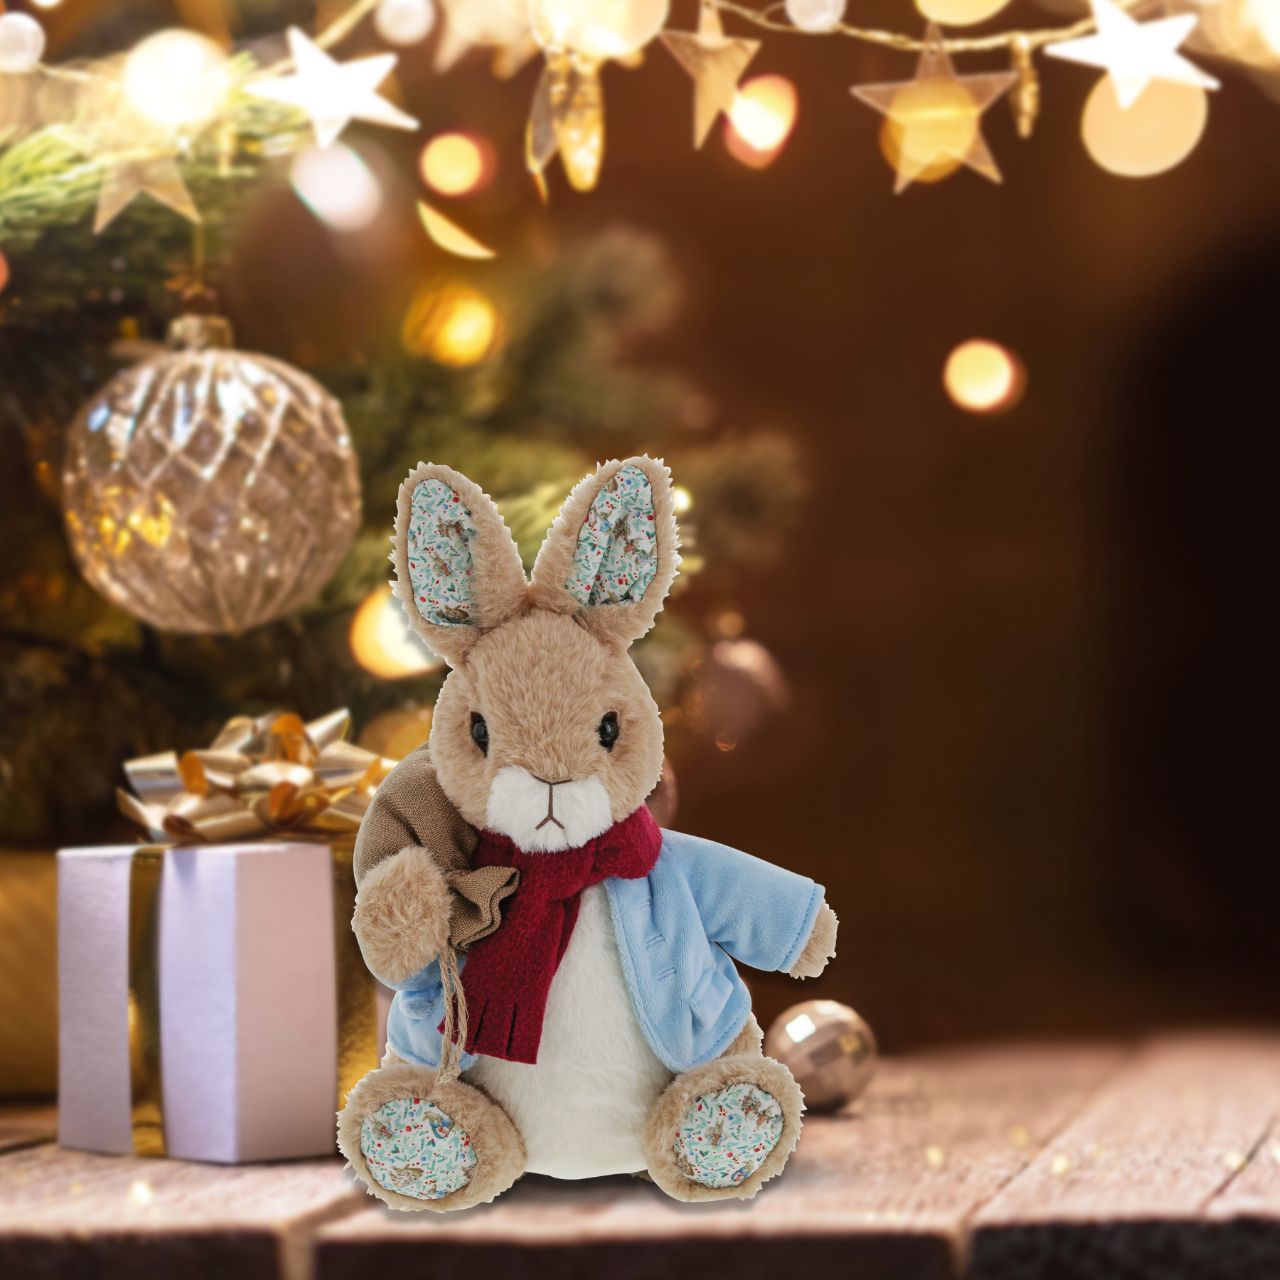 Peter Rabbit Christmas Large  We've added a touch of Christmas sparkle to our Peter Rabbit soft you. This Peter Rabbit will make the perfect keepsake for anyone who loves Christmas and the festivities it brings. A gift that isn't just for little ones, but for grownups too. Your new Peter Rabbit friend will arrive with a cute cosy scarf and festive sack.